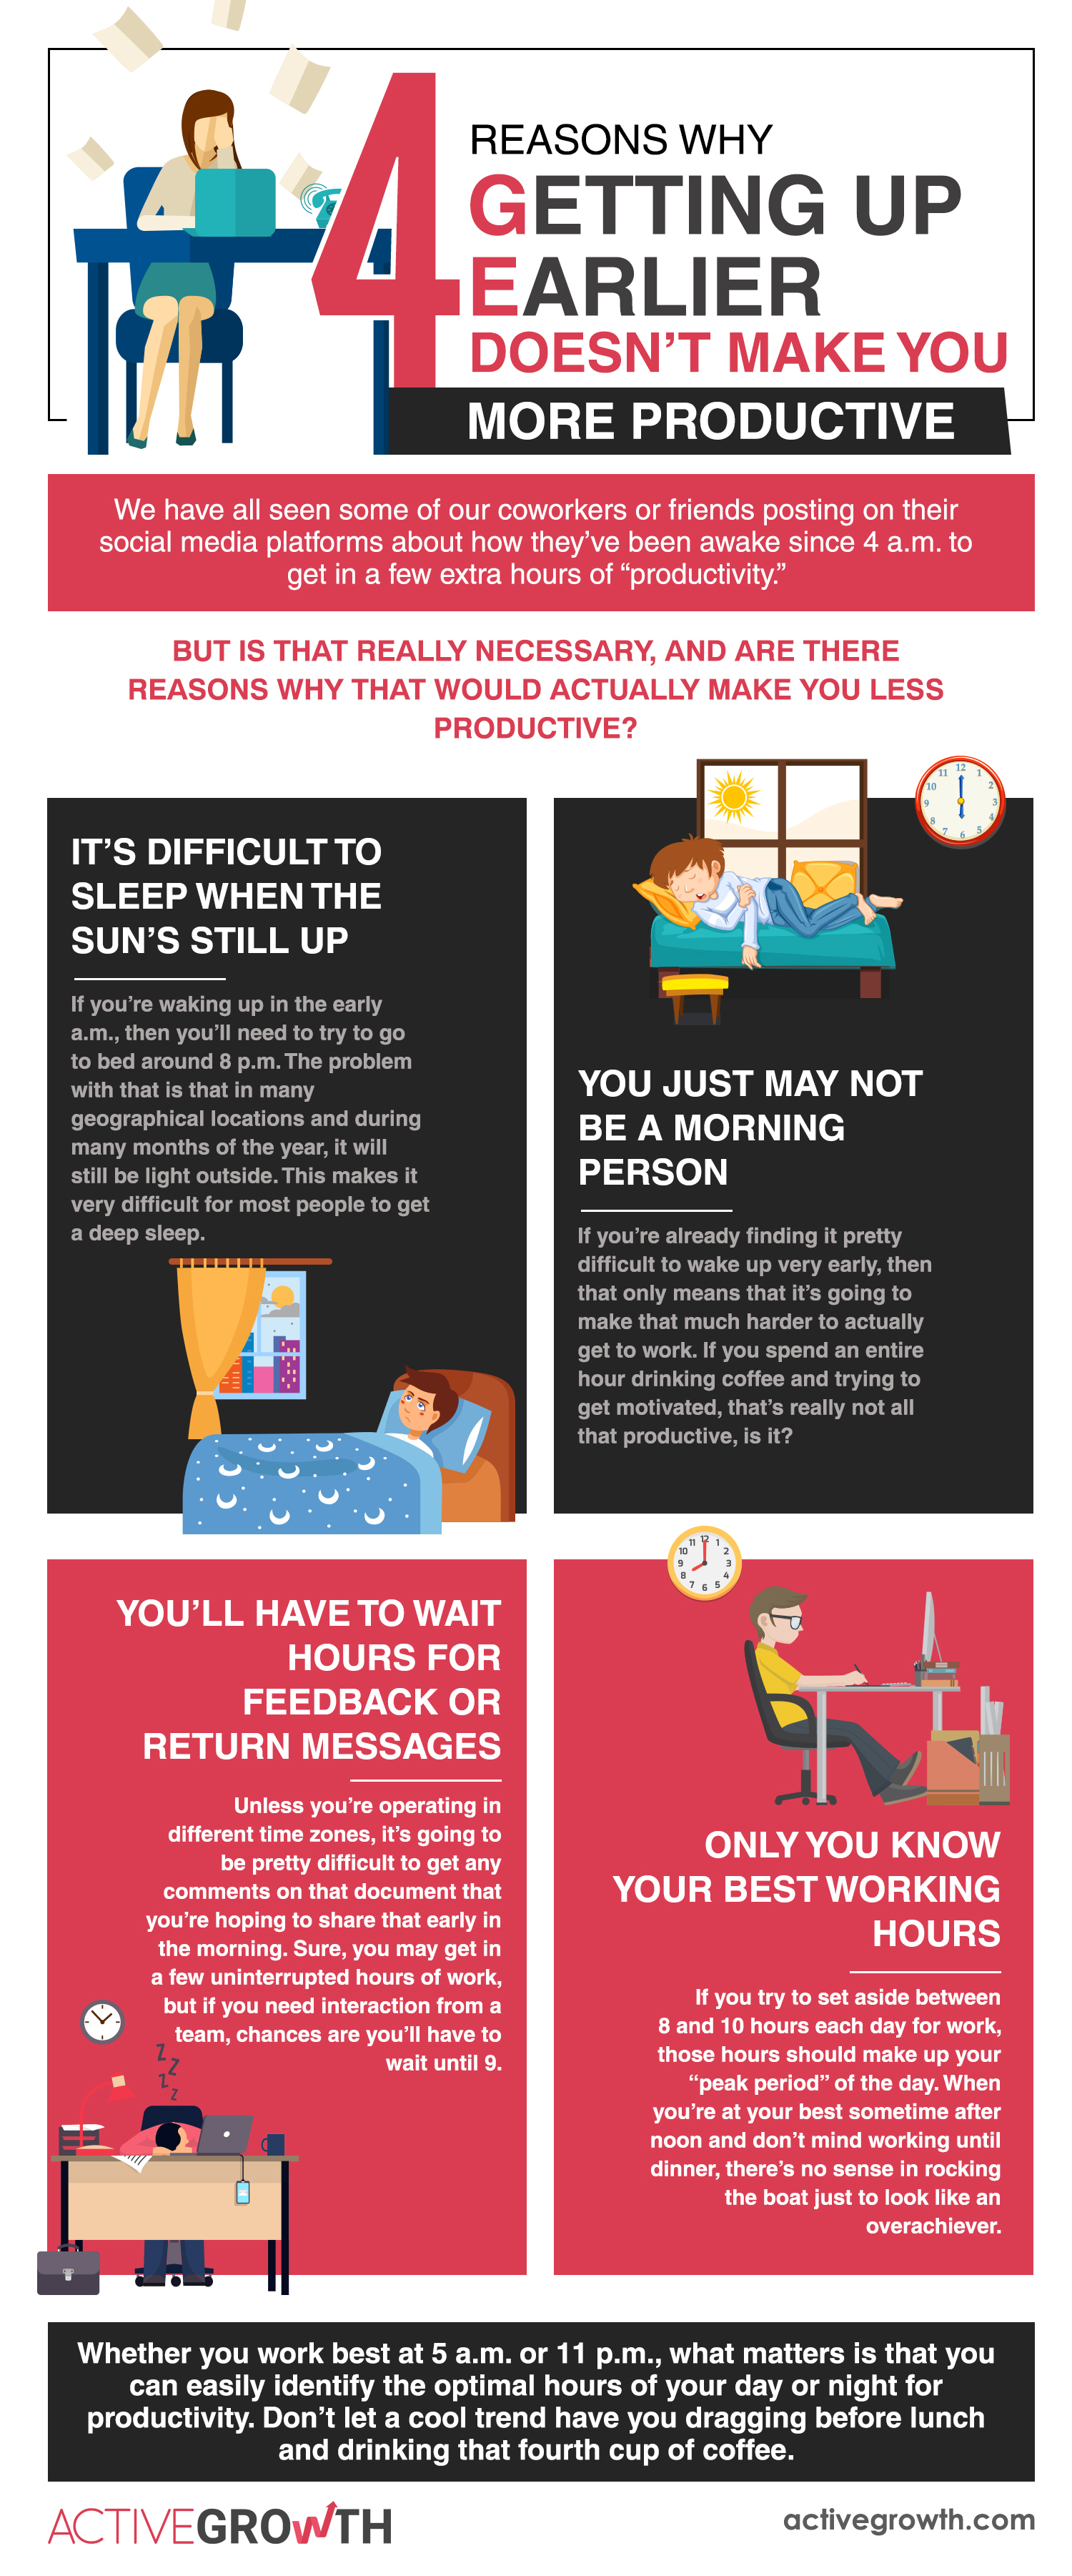 4 Reasons Why Getting Up Earlier Doesn’t Make You More Productive